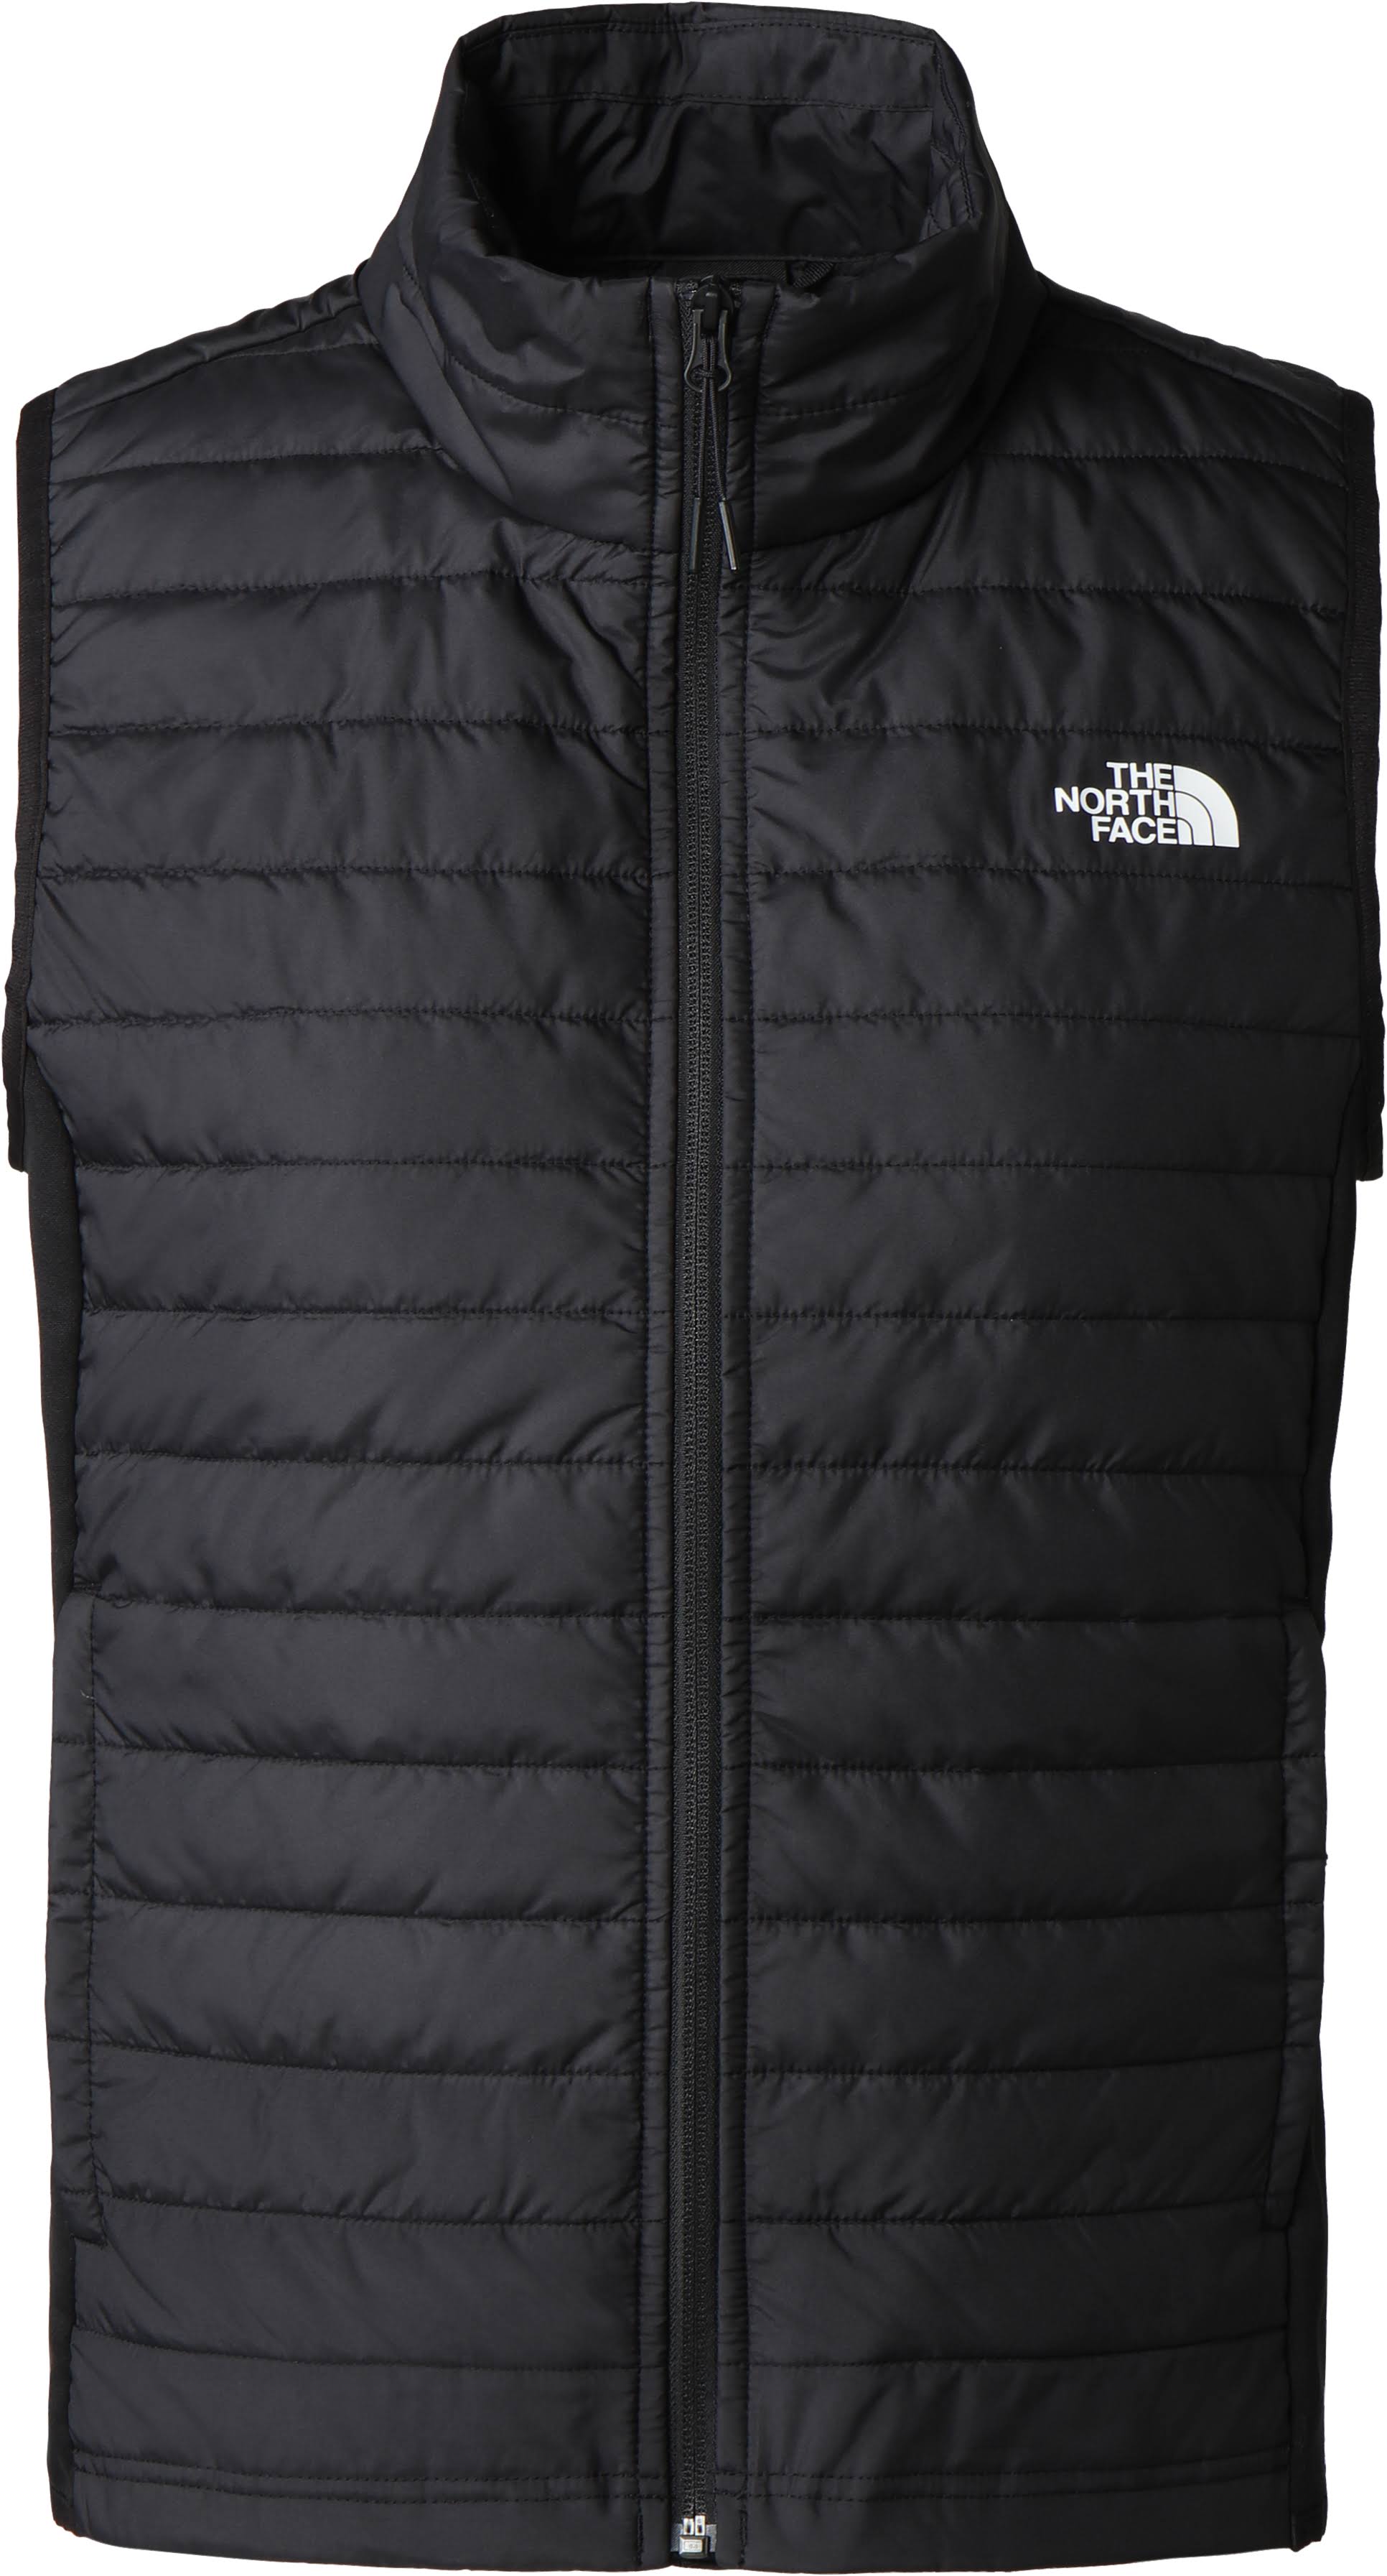 North Face Womens Canyonlands Hybrid Gilet Black S